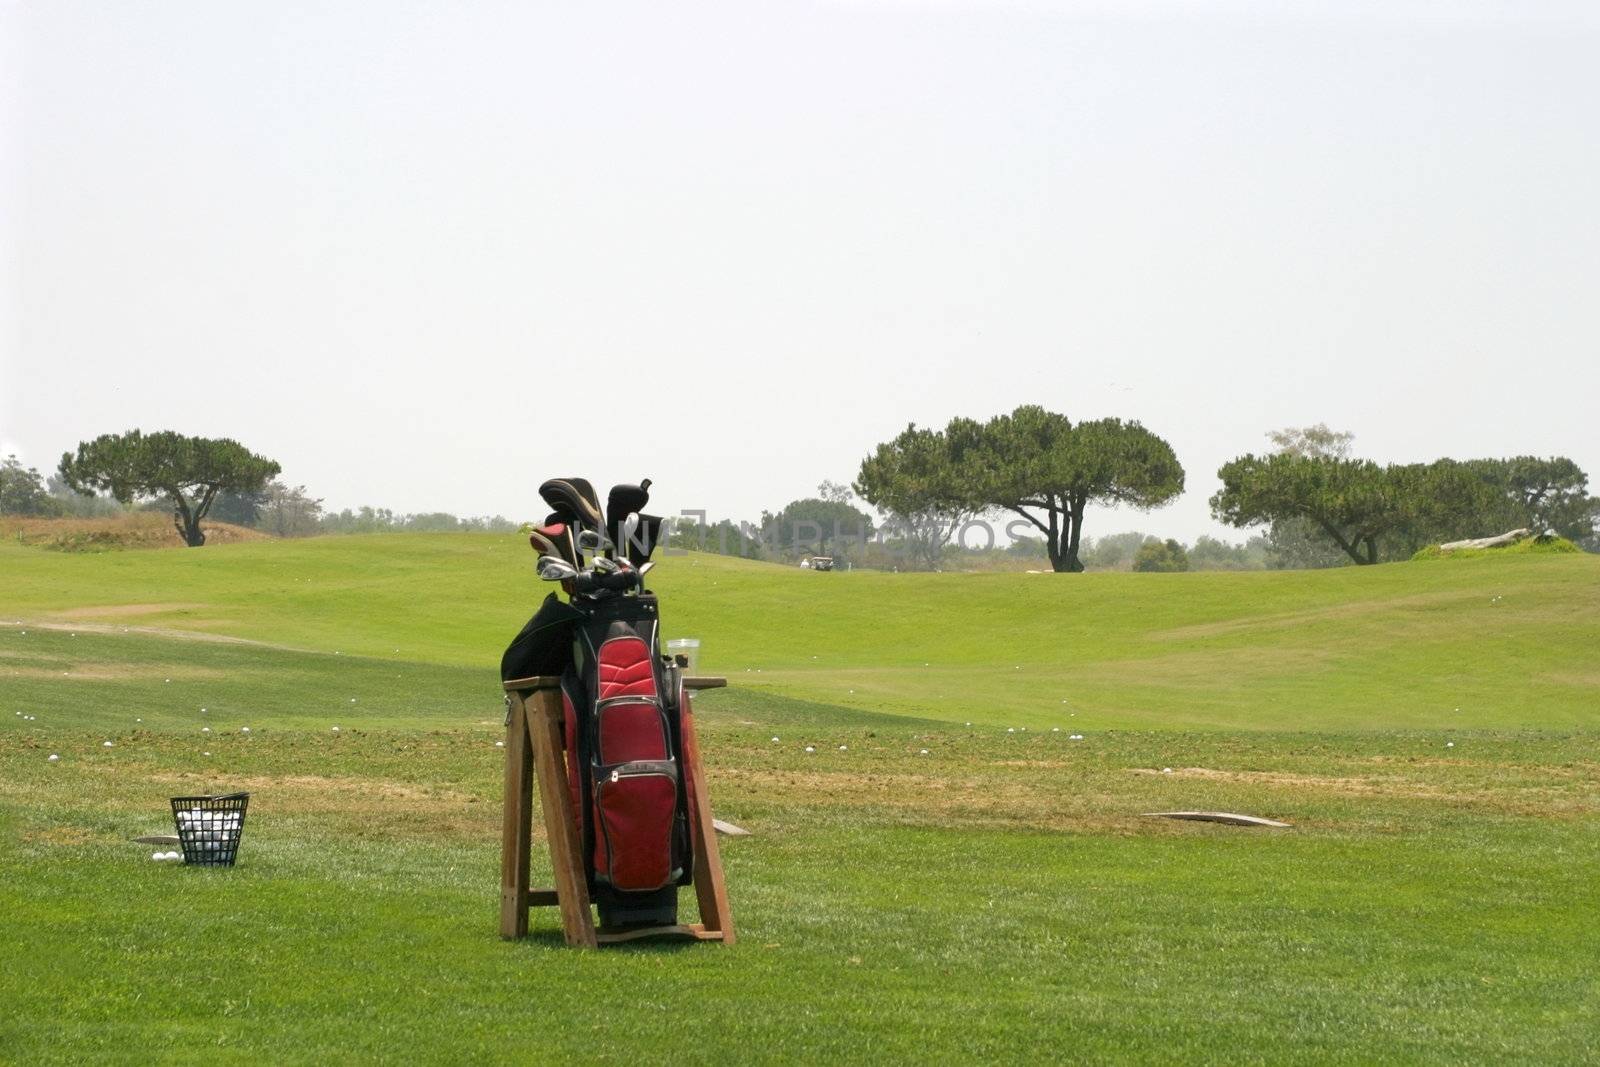 Golf Bag with a basket of golfballs and a driving range in the background.